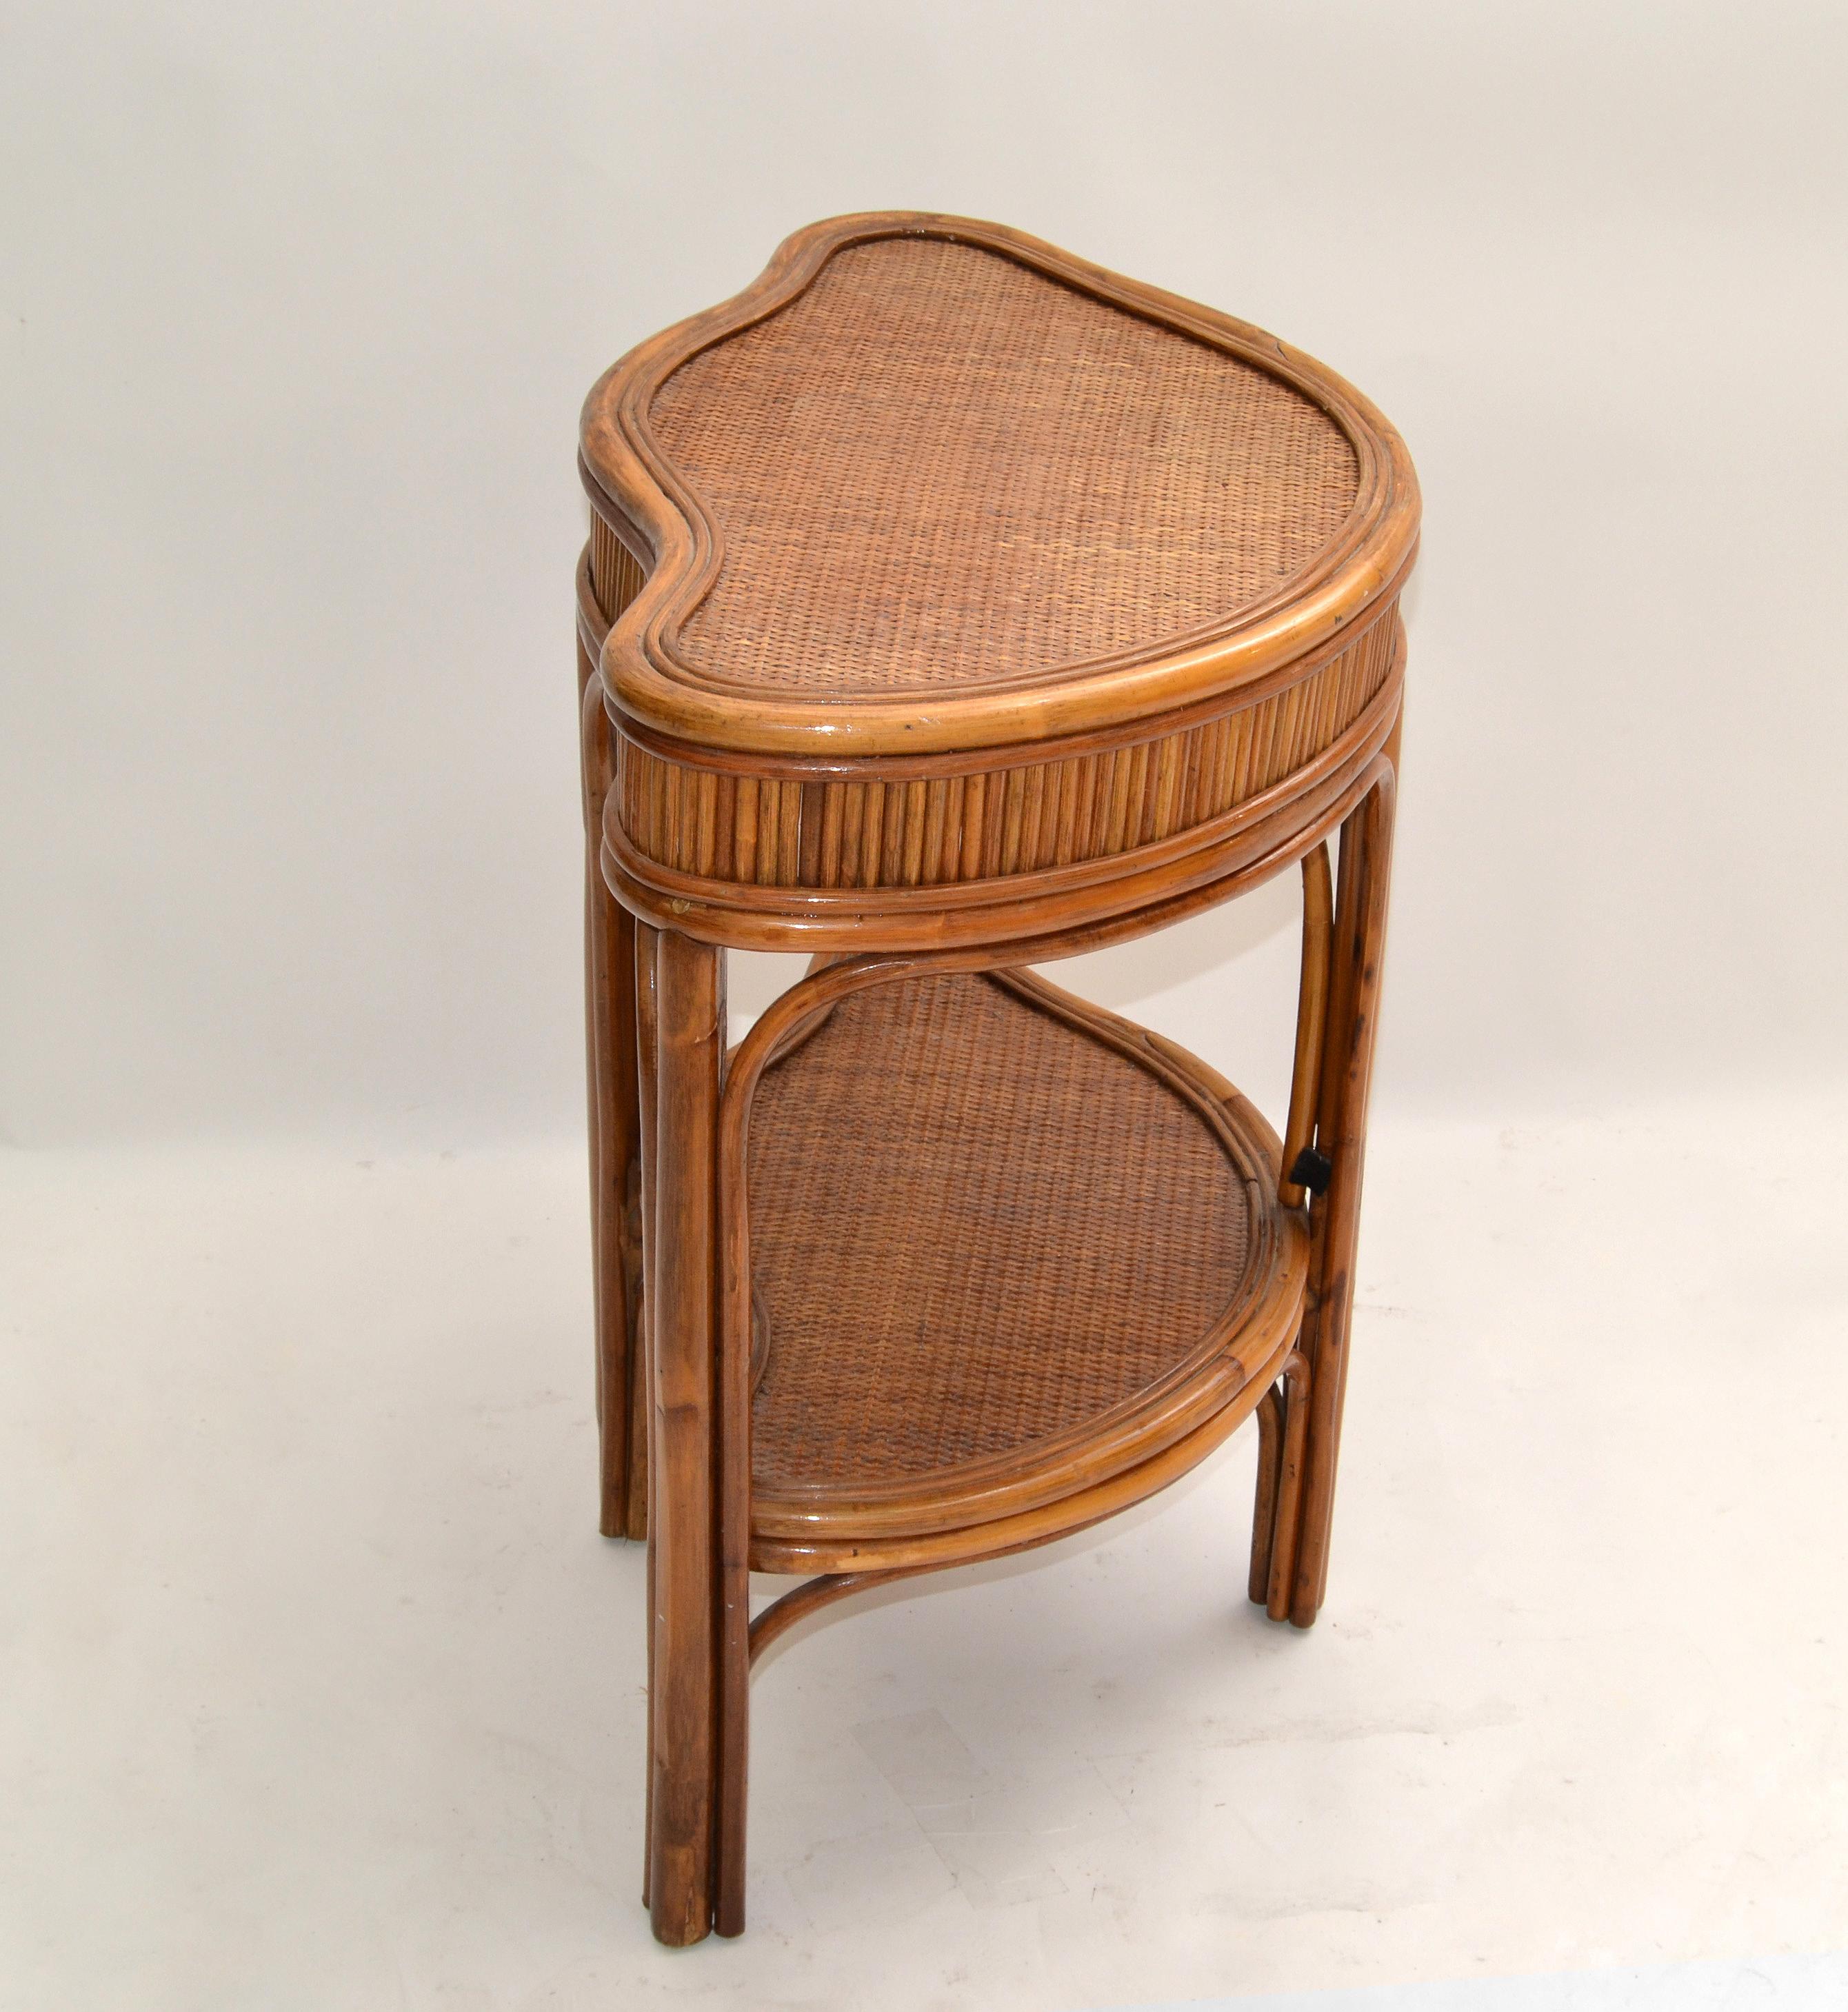 Chinoiserie Bamboo & Rattan Handmade Two-Tier Side, End Table Asian Modern 70s In Good Condition For Sale In Miami, FL